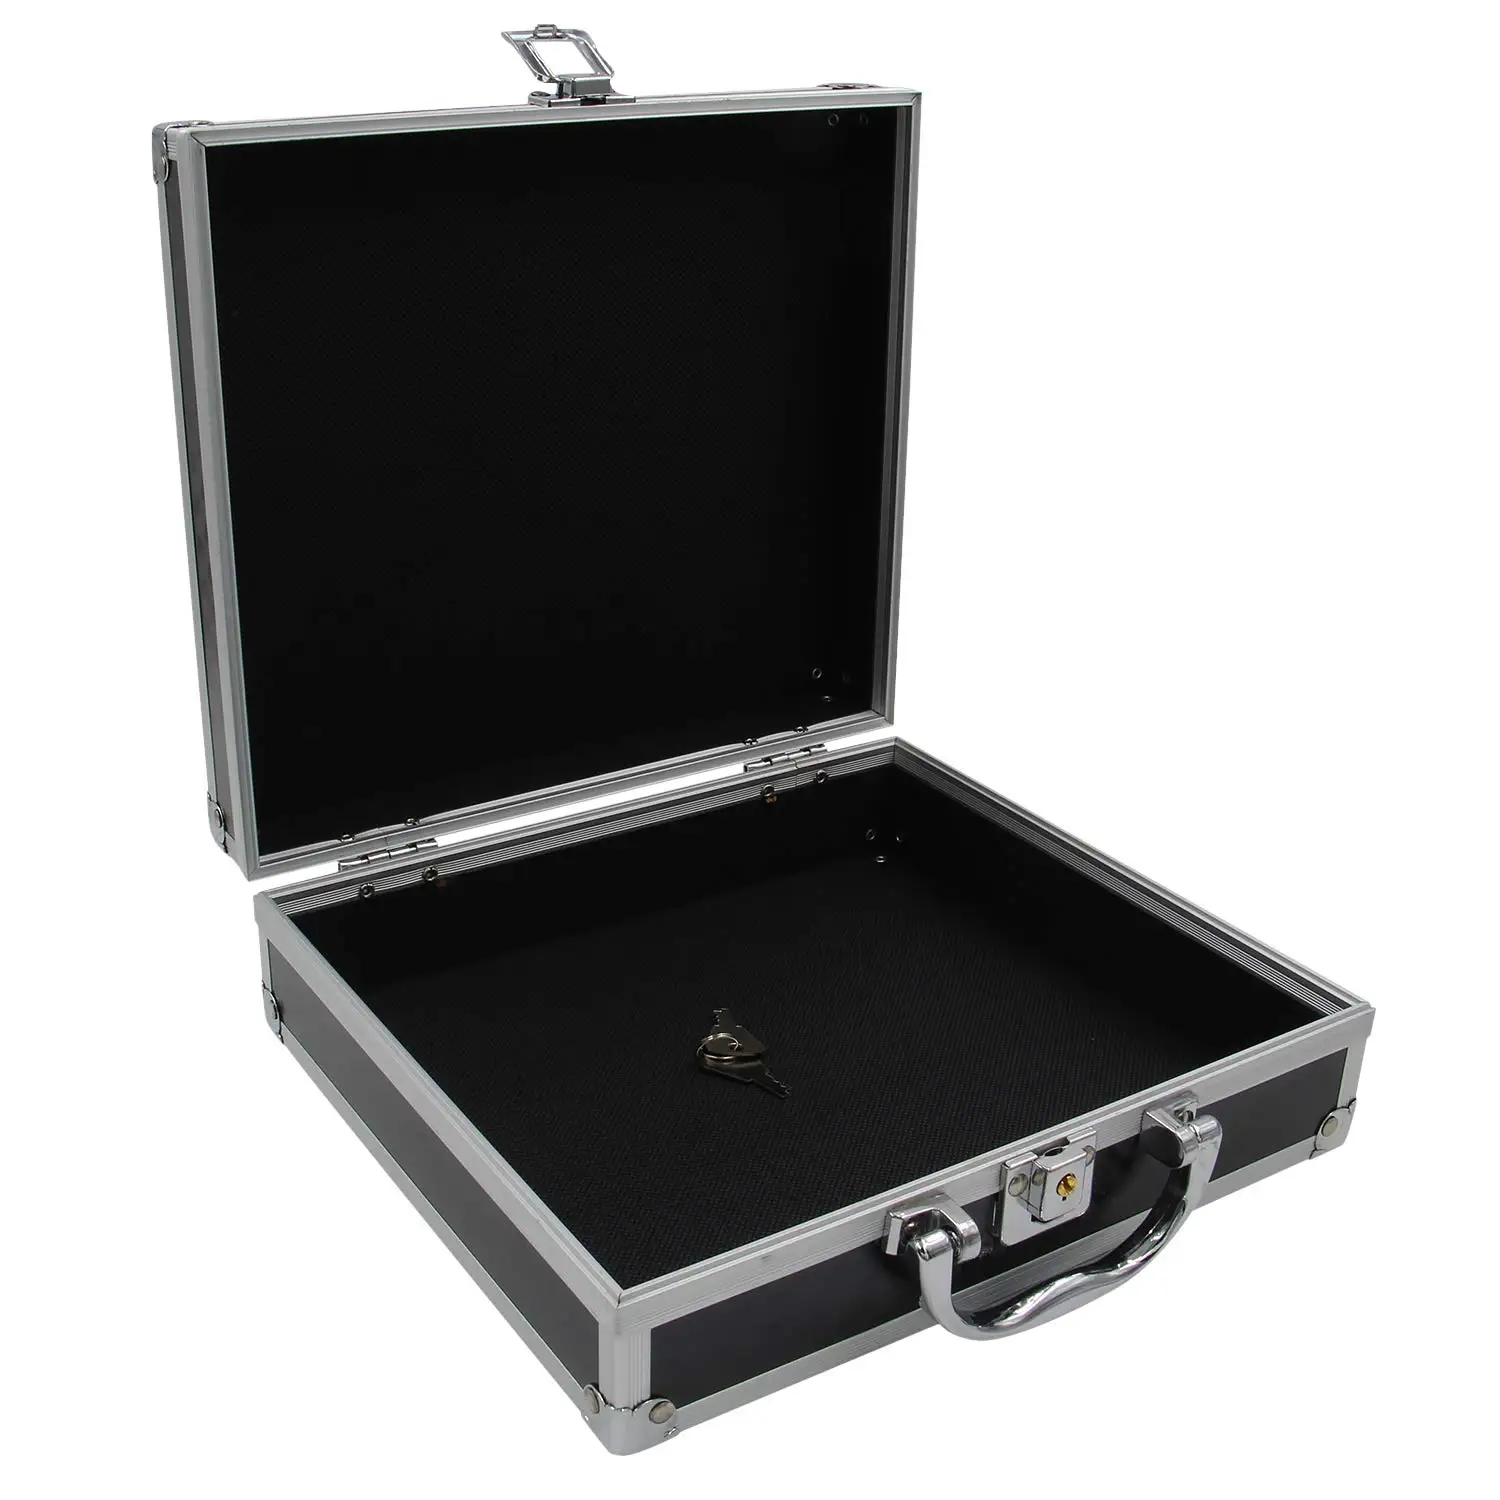 Small Tattoo Kit Case Mini Tattoo Machine Case Box Makeup Carry Box Storage  Case With Sponge For Tattoo Equipment - Buy Locking Aluminum Carry Case,Portable  Coin Carrying Case,Custom Hard Tool Case Product